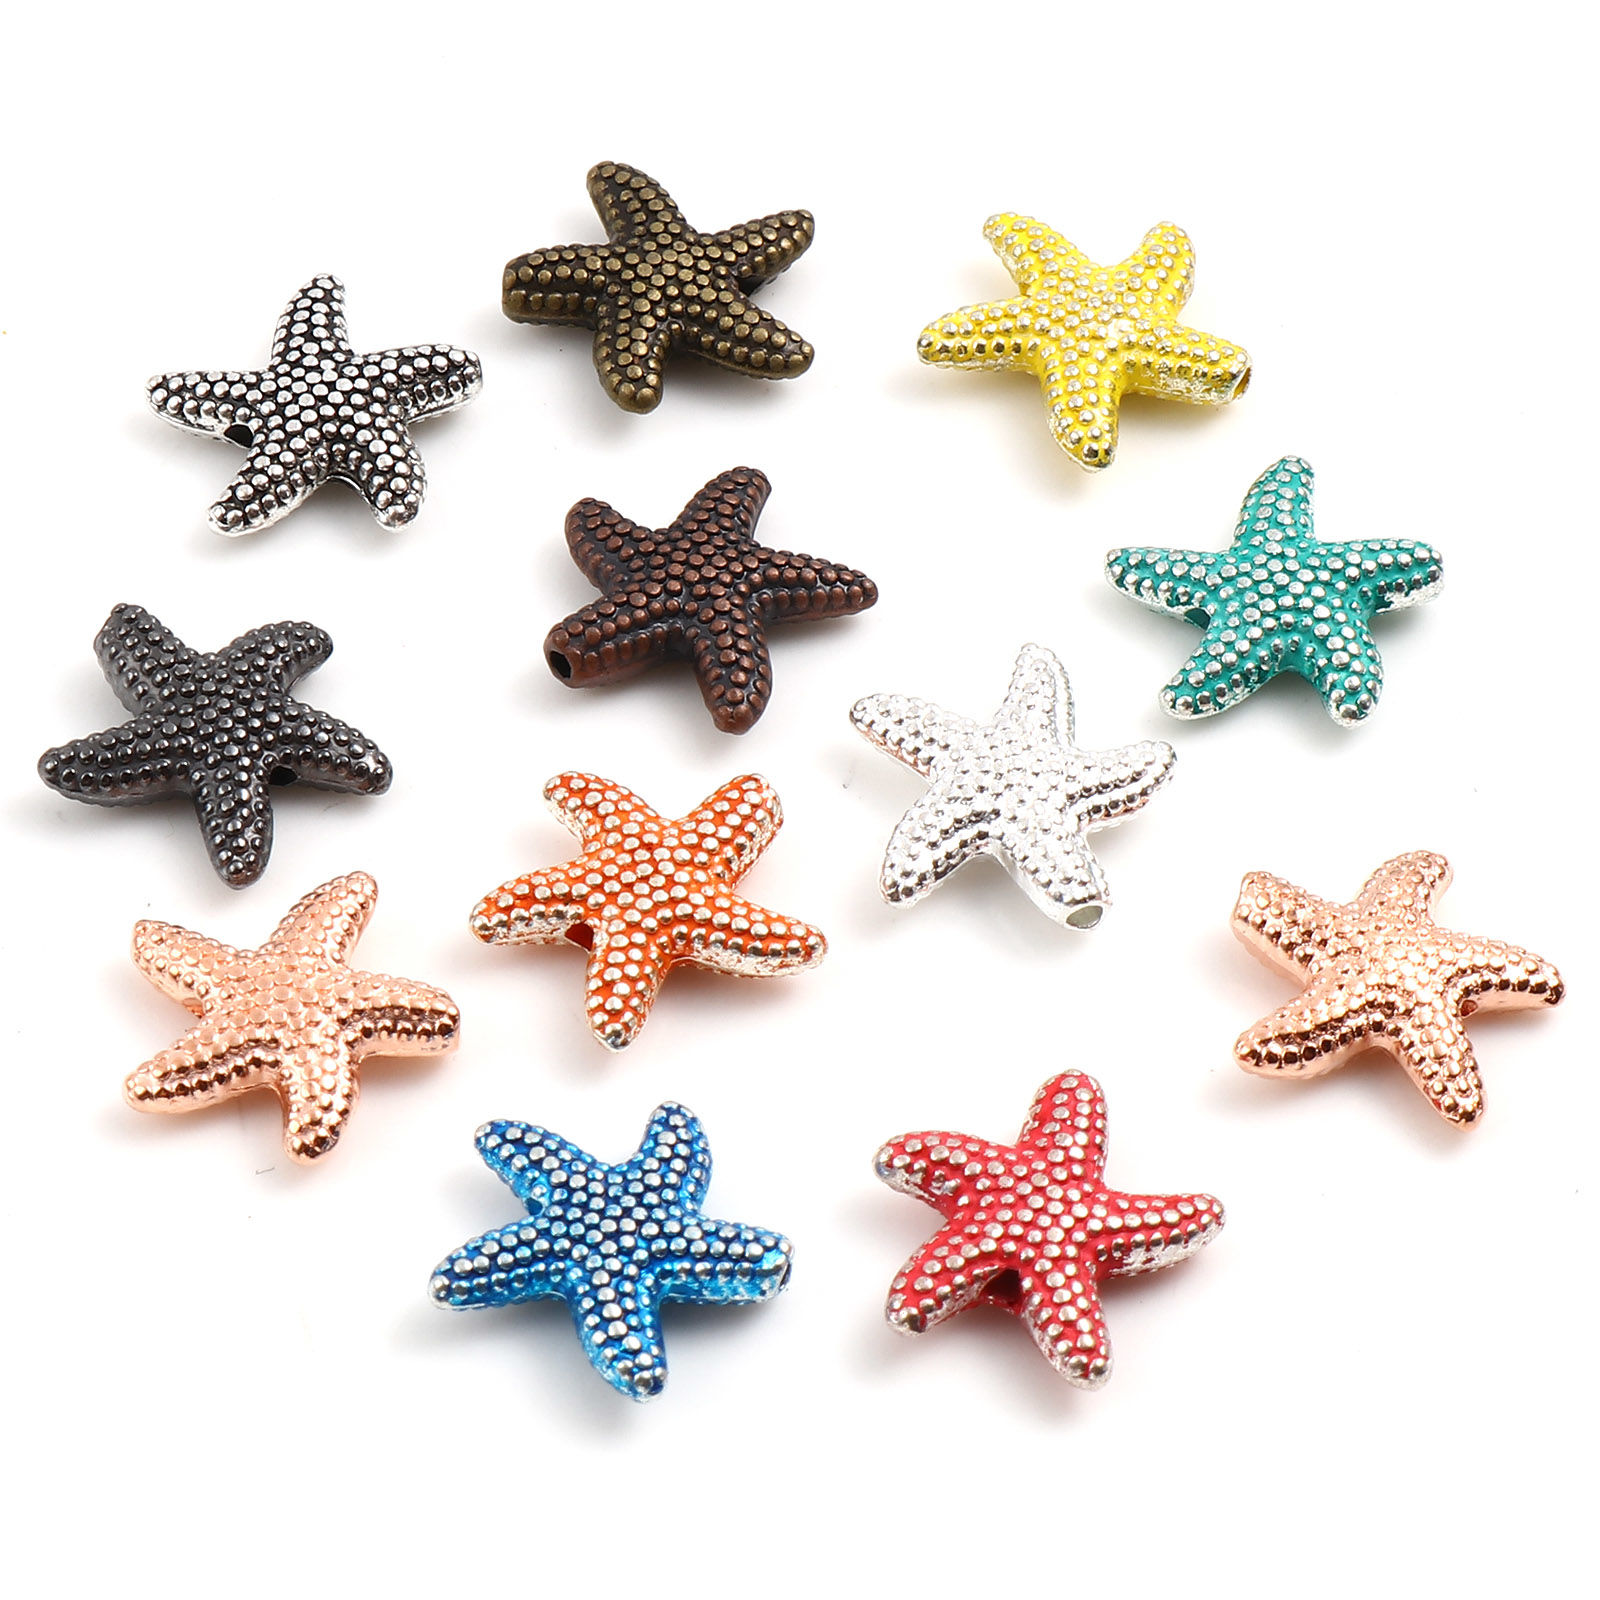 Picture of Zinc Based Alloy Ocean Jewelry Spacer Beads Star Fish Red About 14mm x 13.5mm, Hole: Approx 1.3mm, 20 PCs